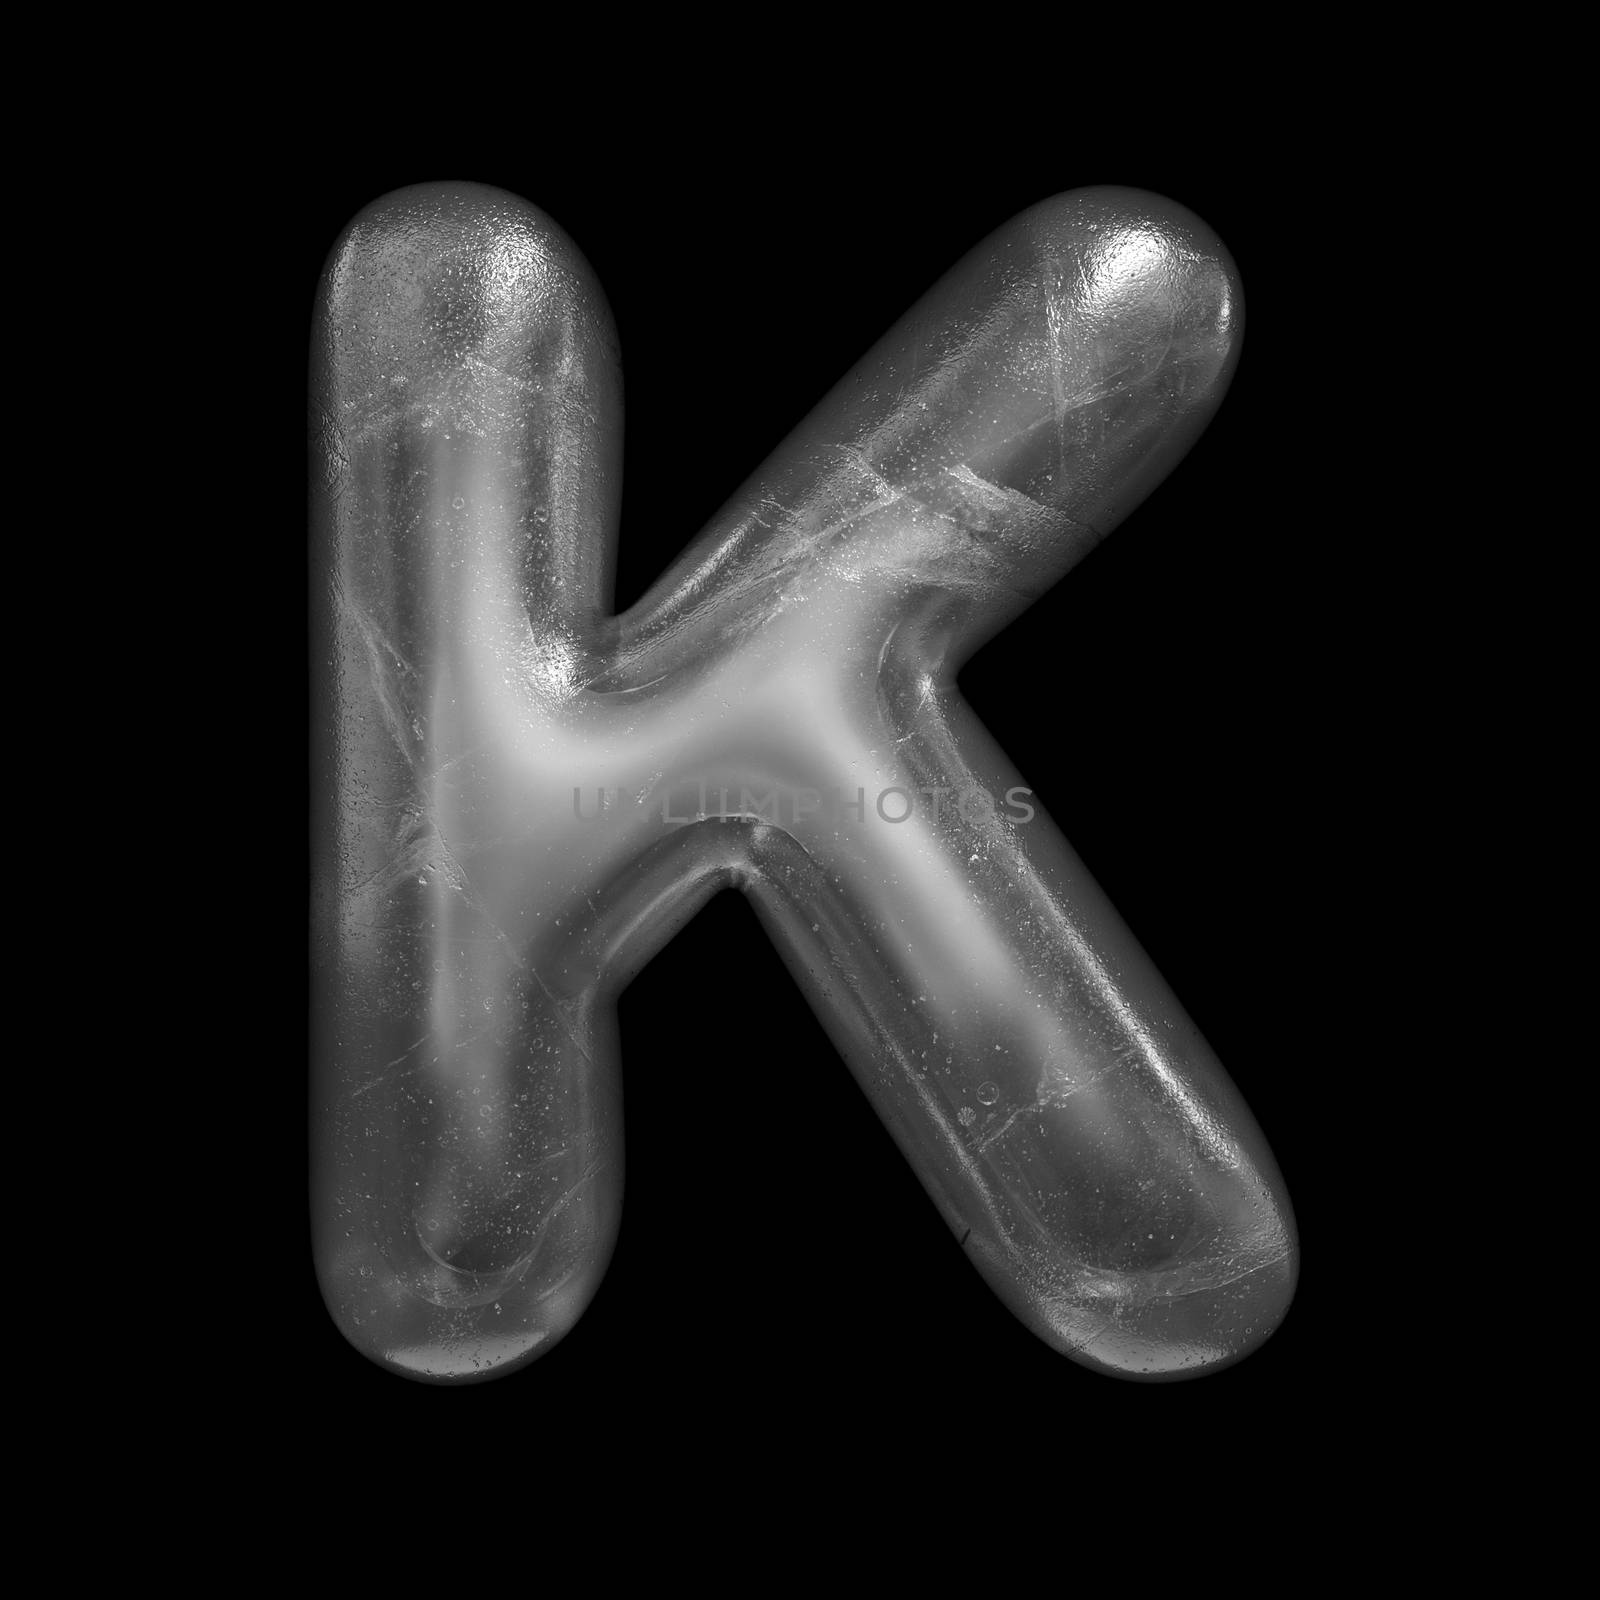 Ice letter K - Capital 3d Winter font - suitable for Nature, Winter or Christmas related subjects by chrisroll